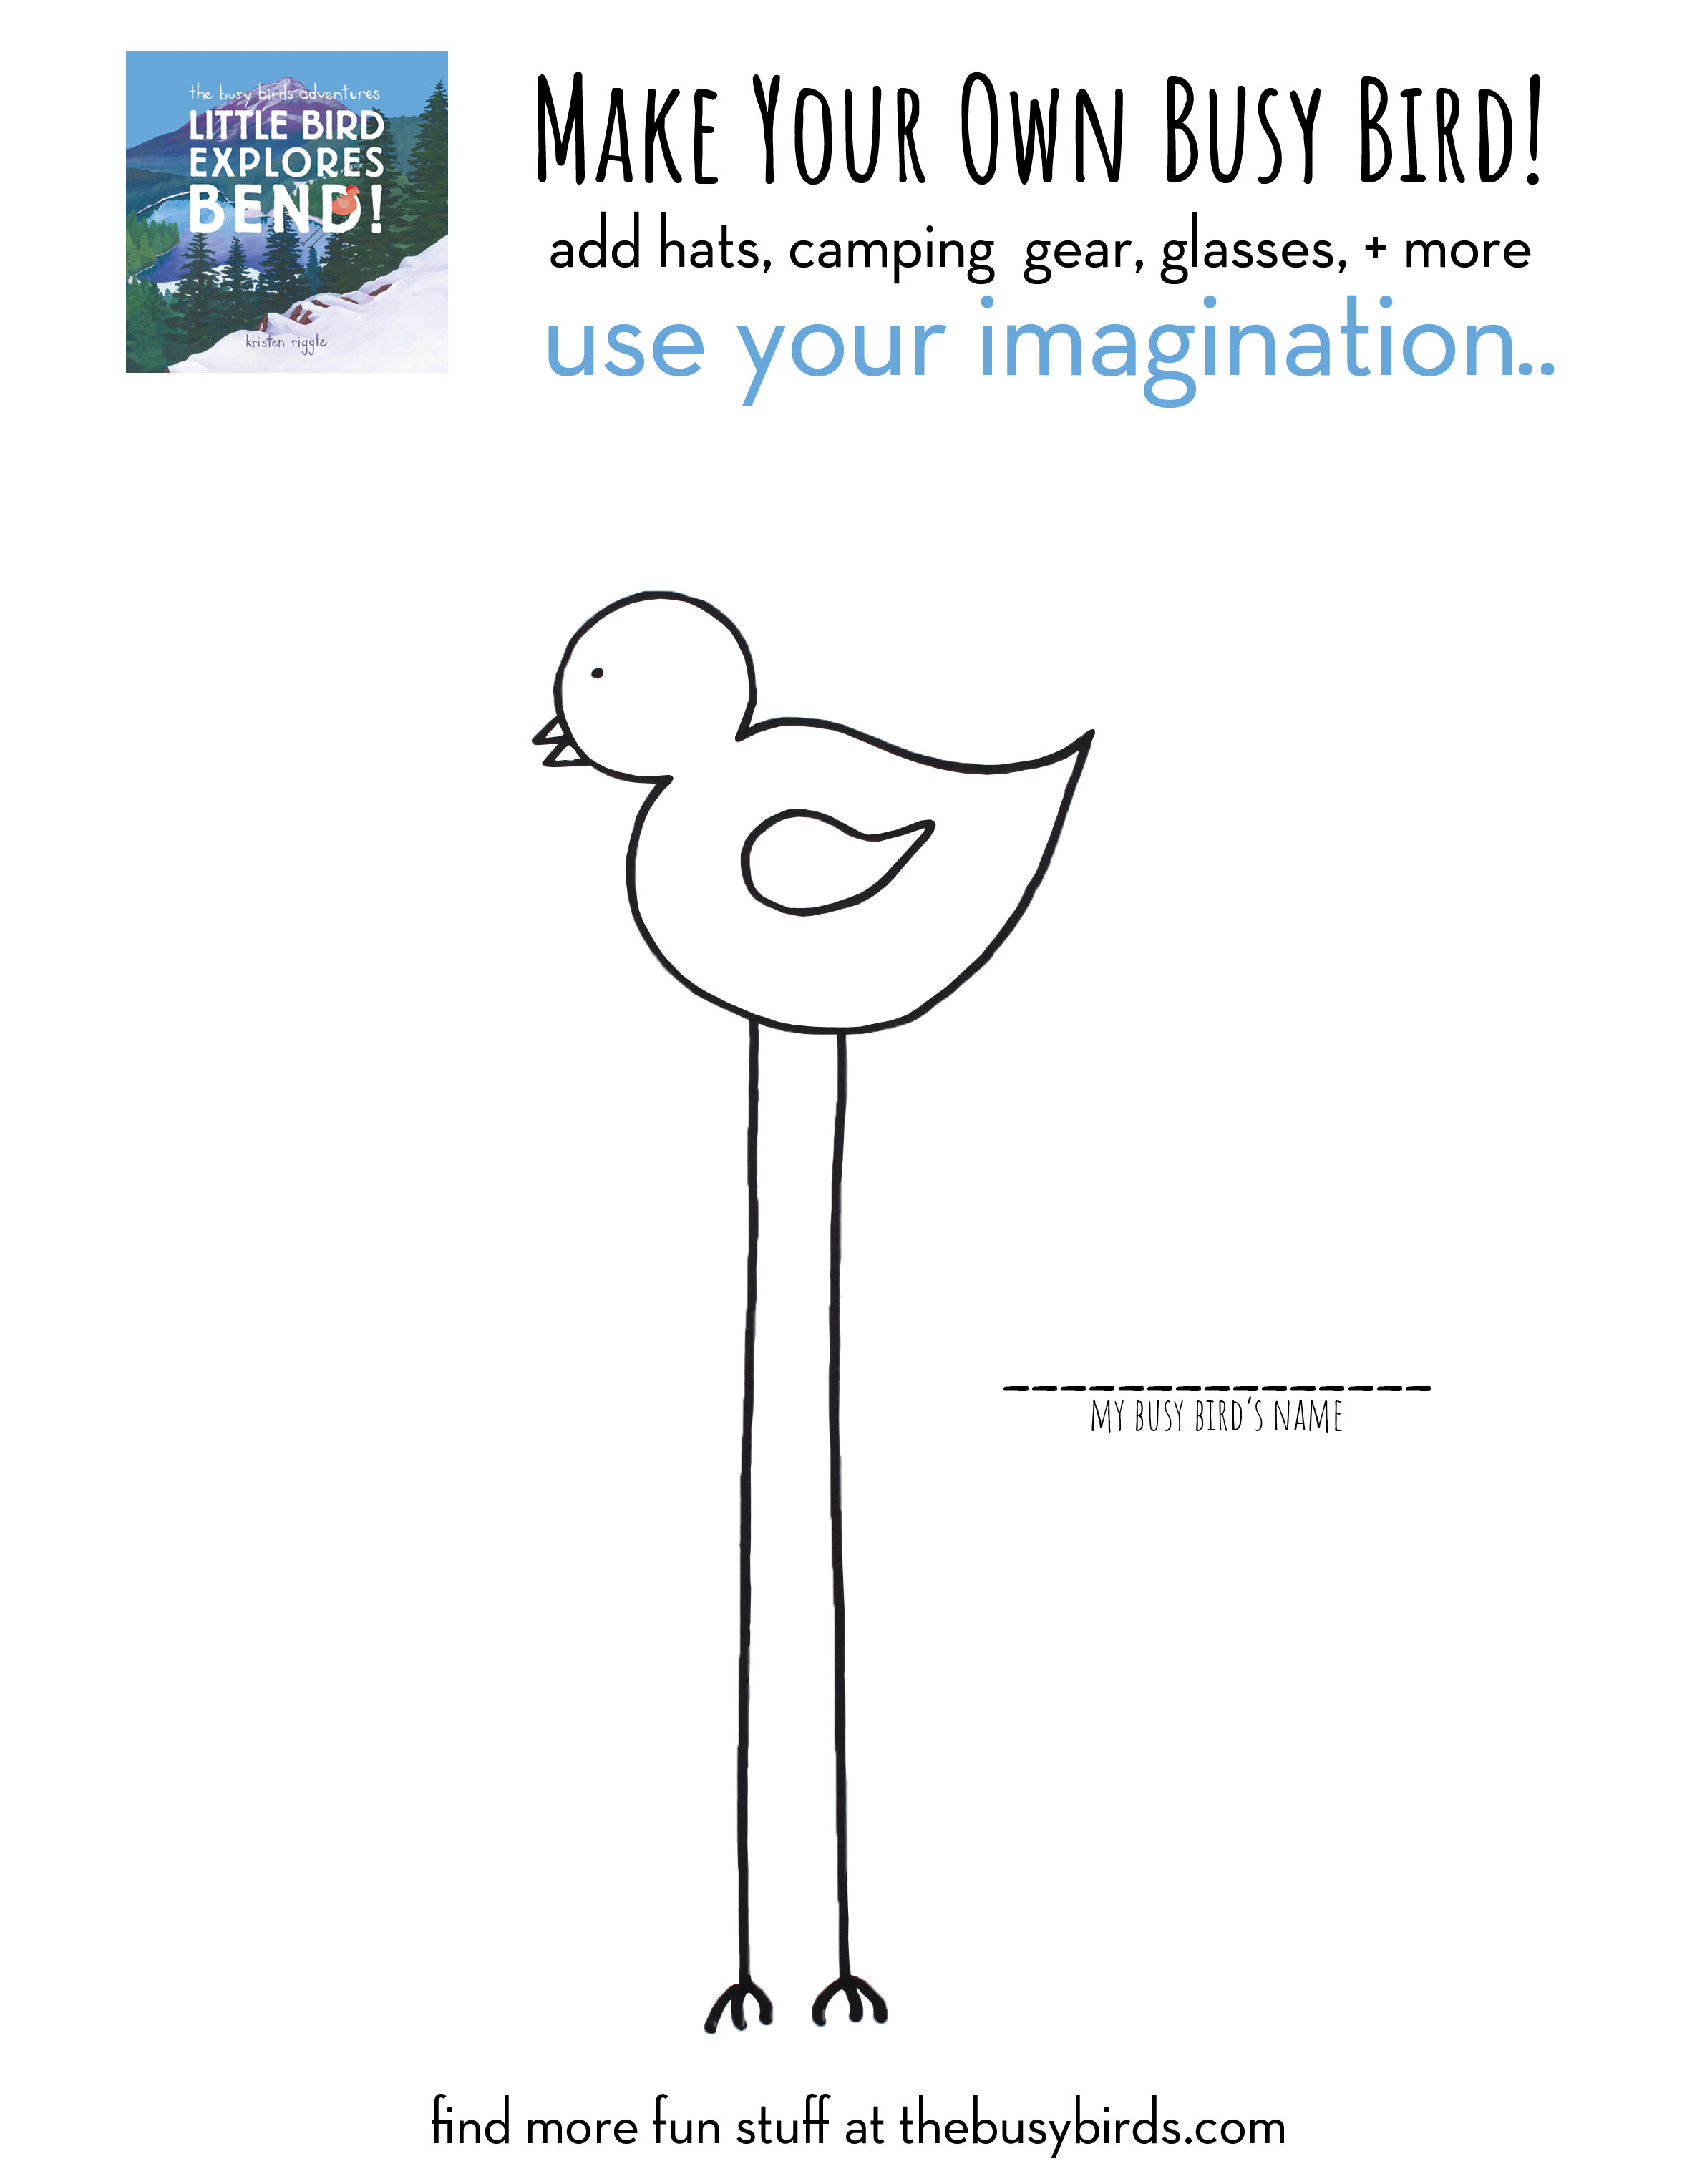 Make Your Own Busy Bird!